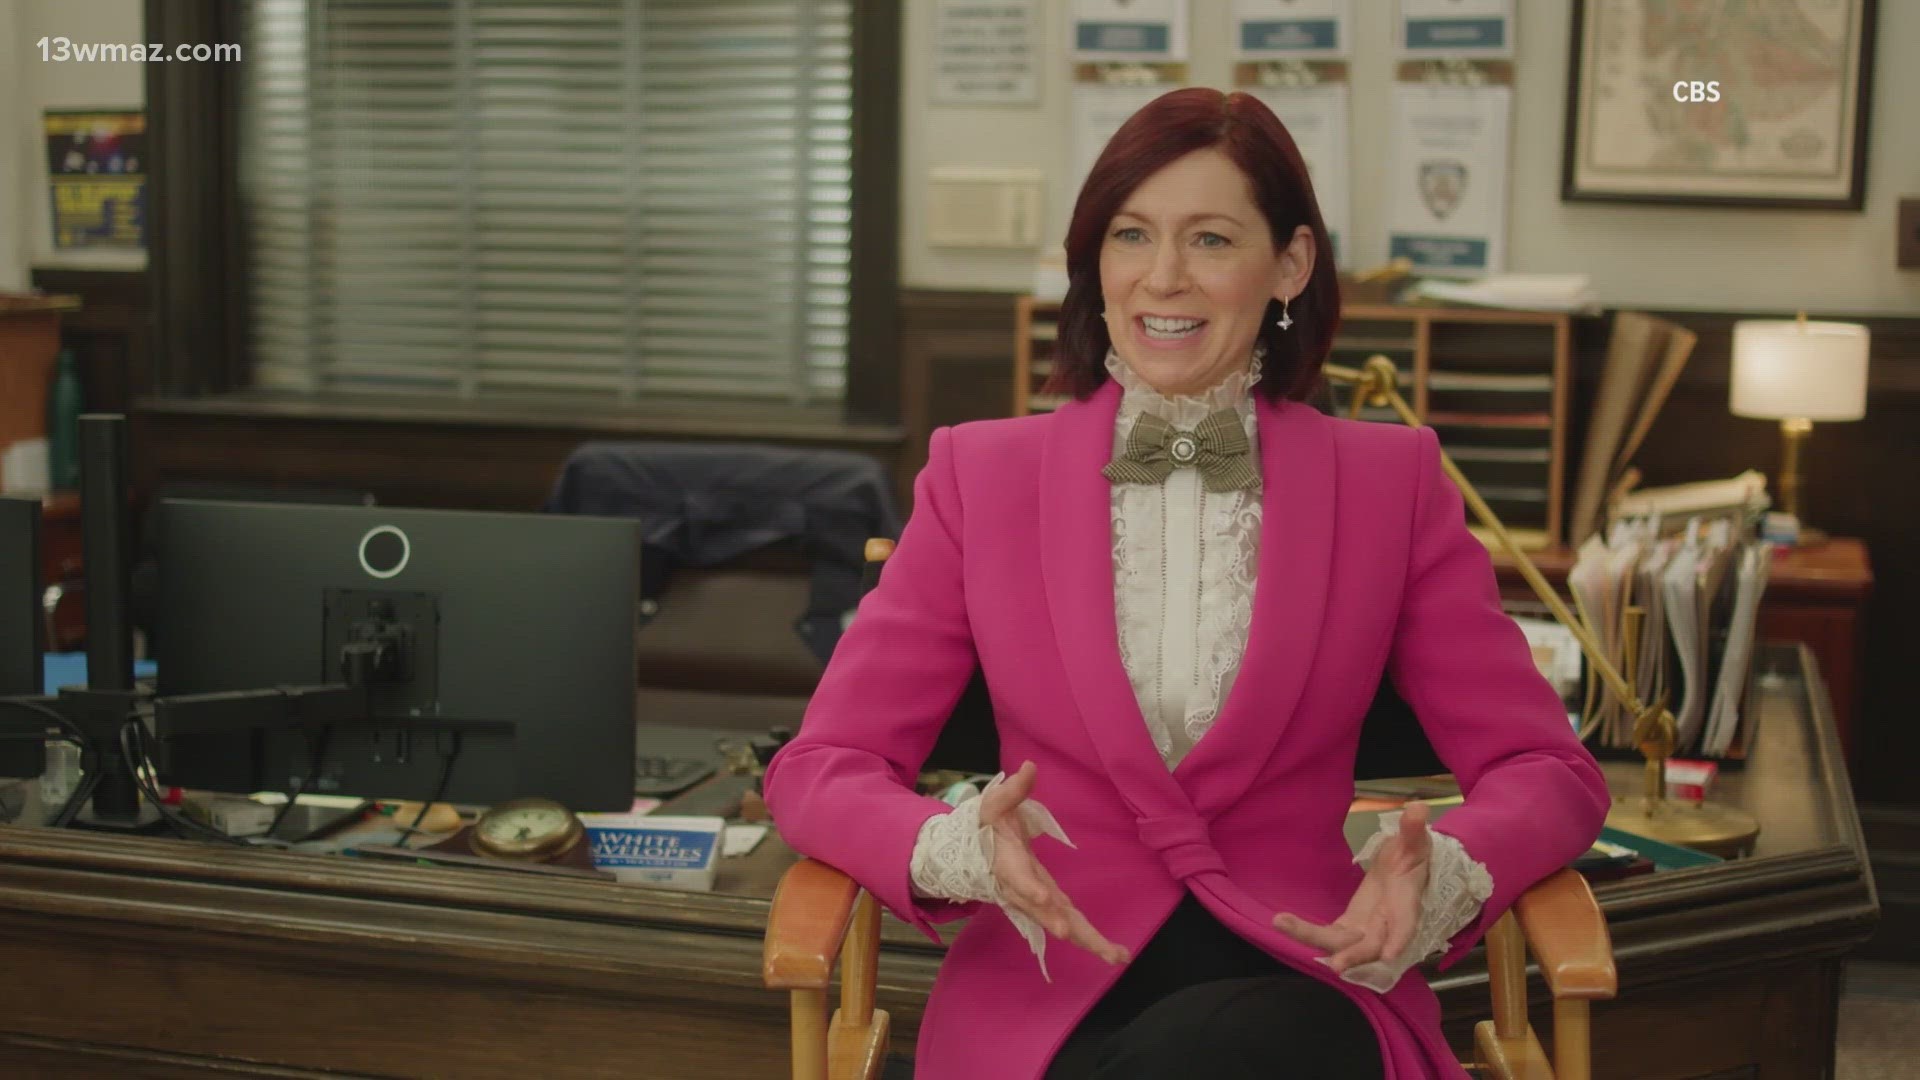 Carrie Preston will star in the CBS spinoff show Elsbeth. Preston will play the main character Elsbeth Tascioni.